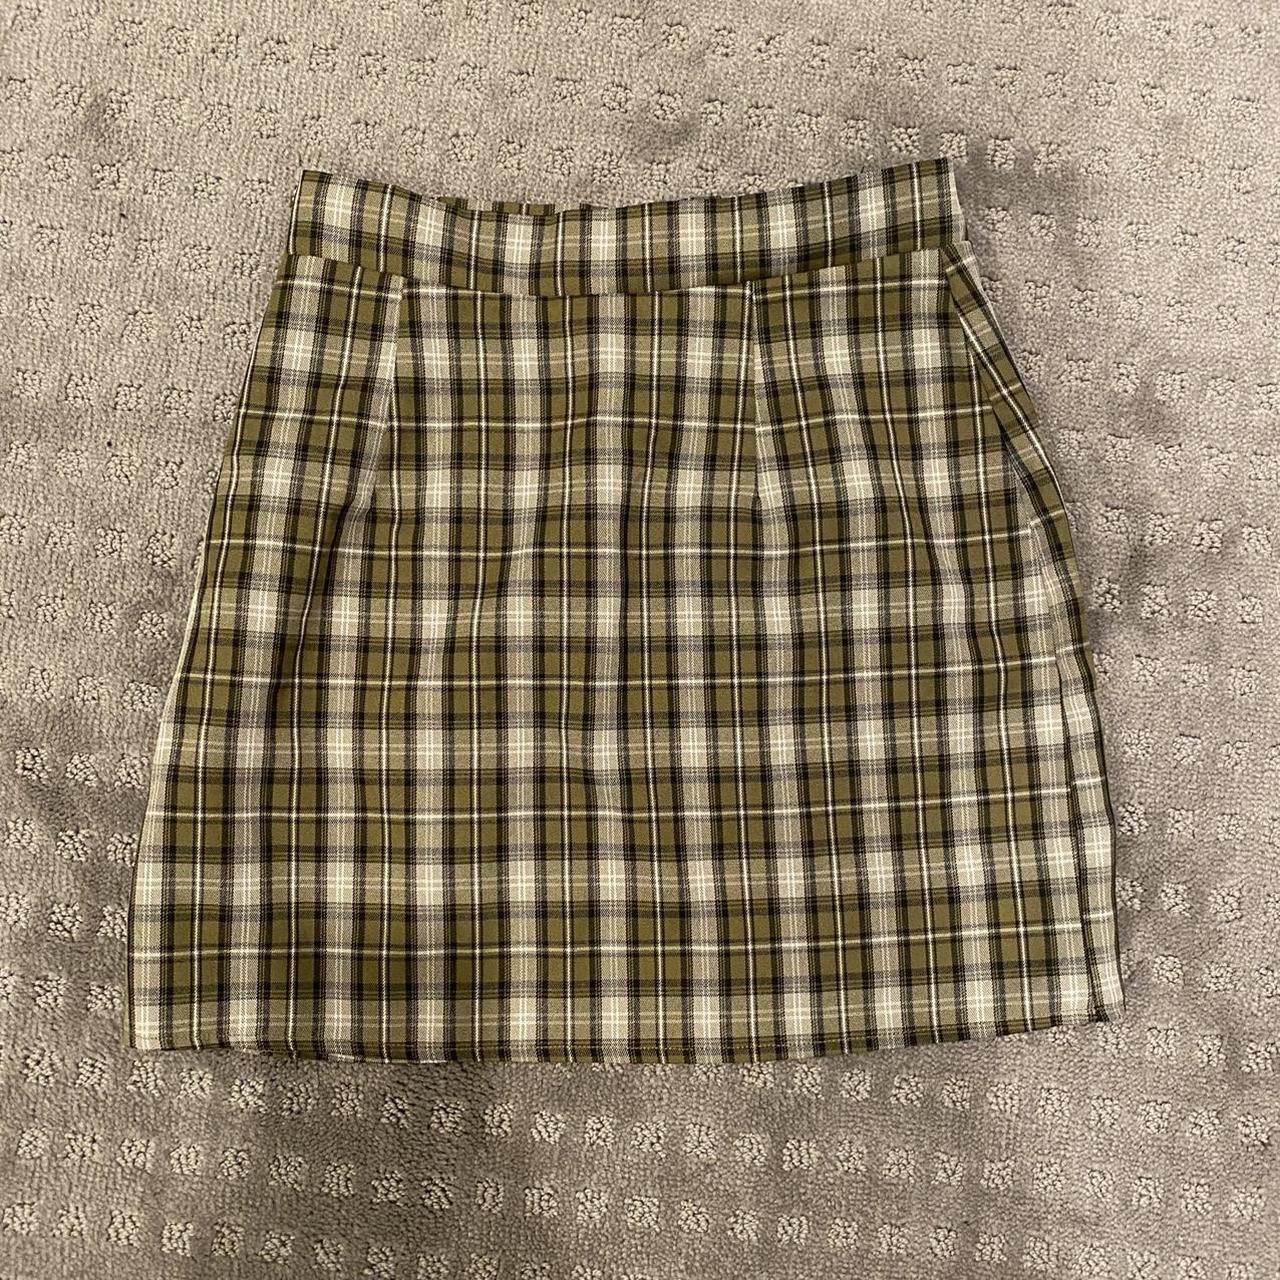 Product Image 1 - 🌿 Yesstyle Green Plaid Skirt